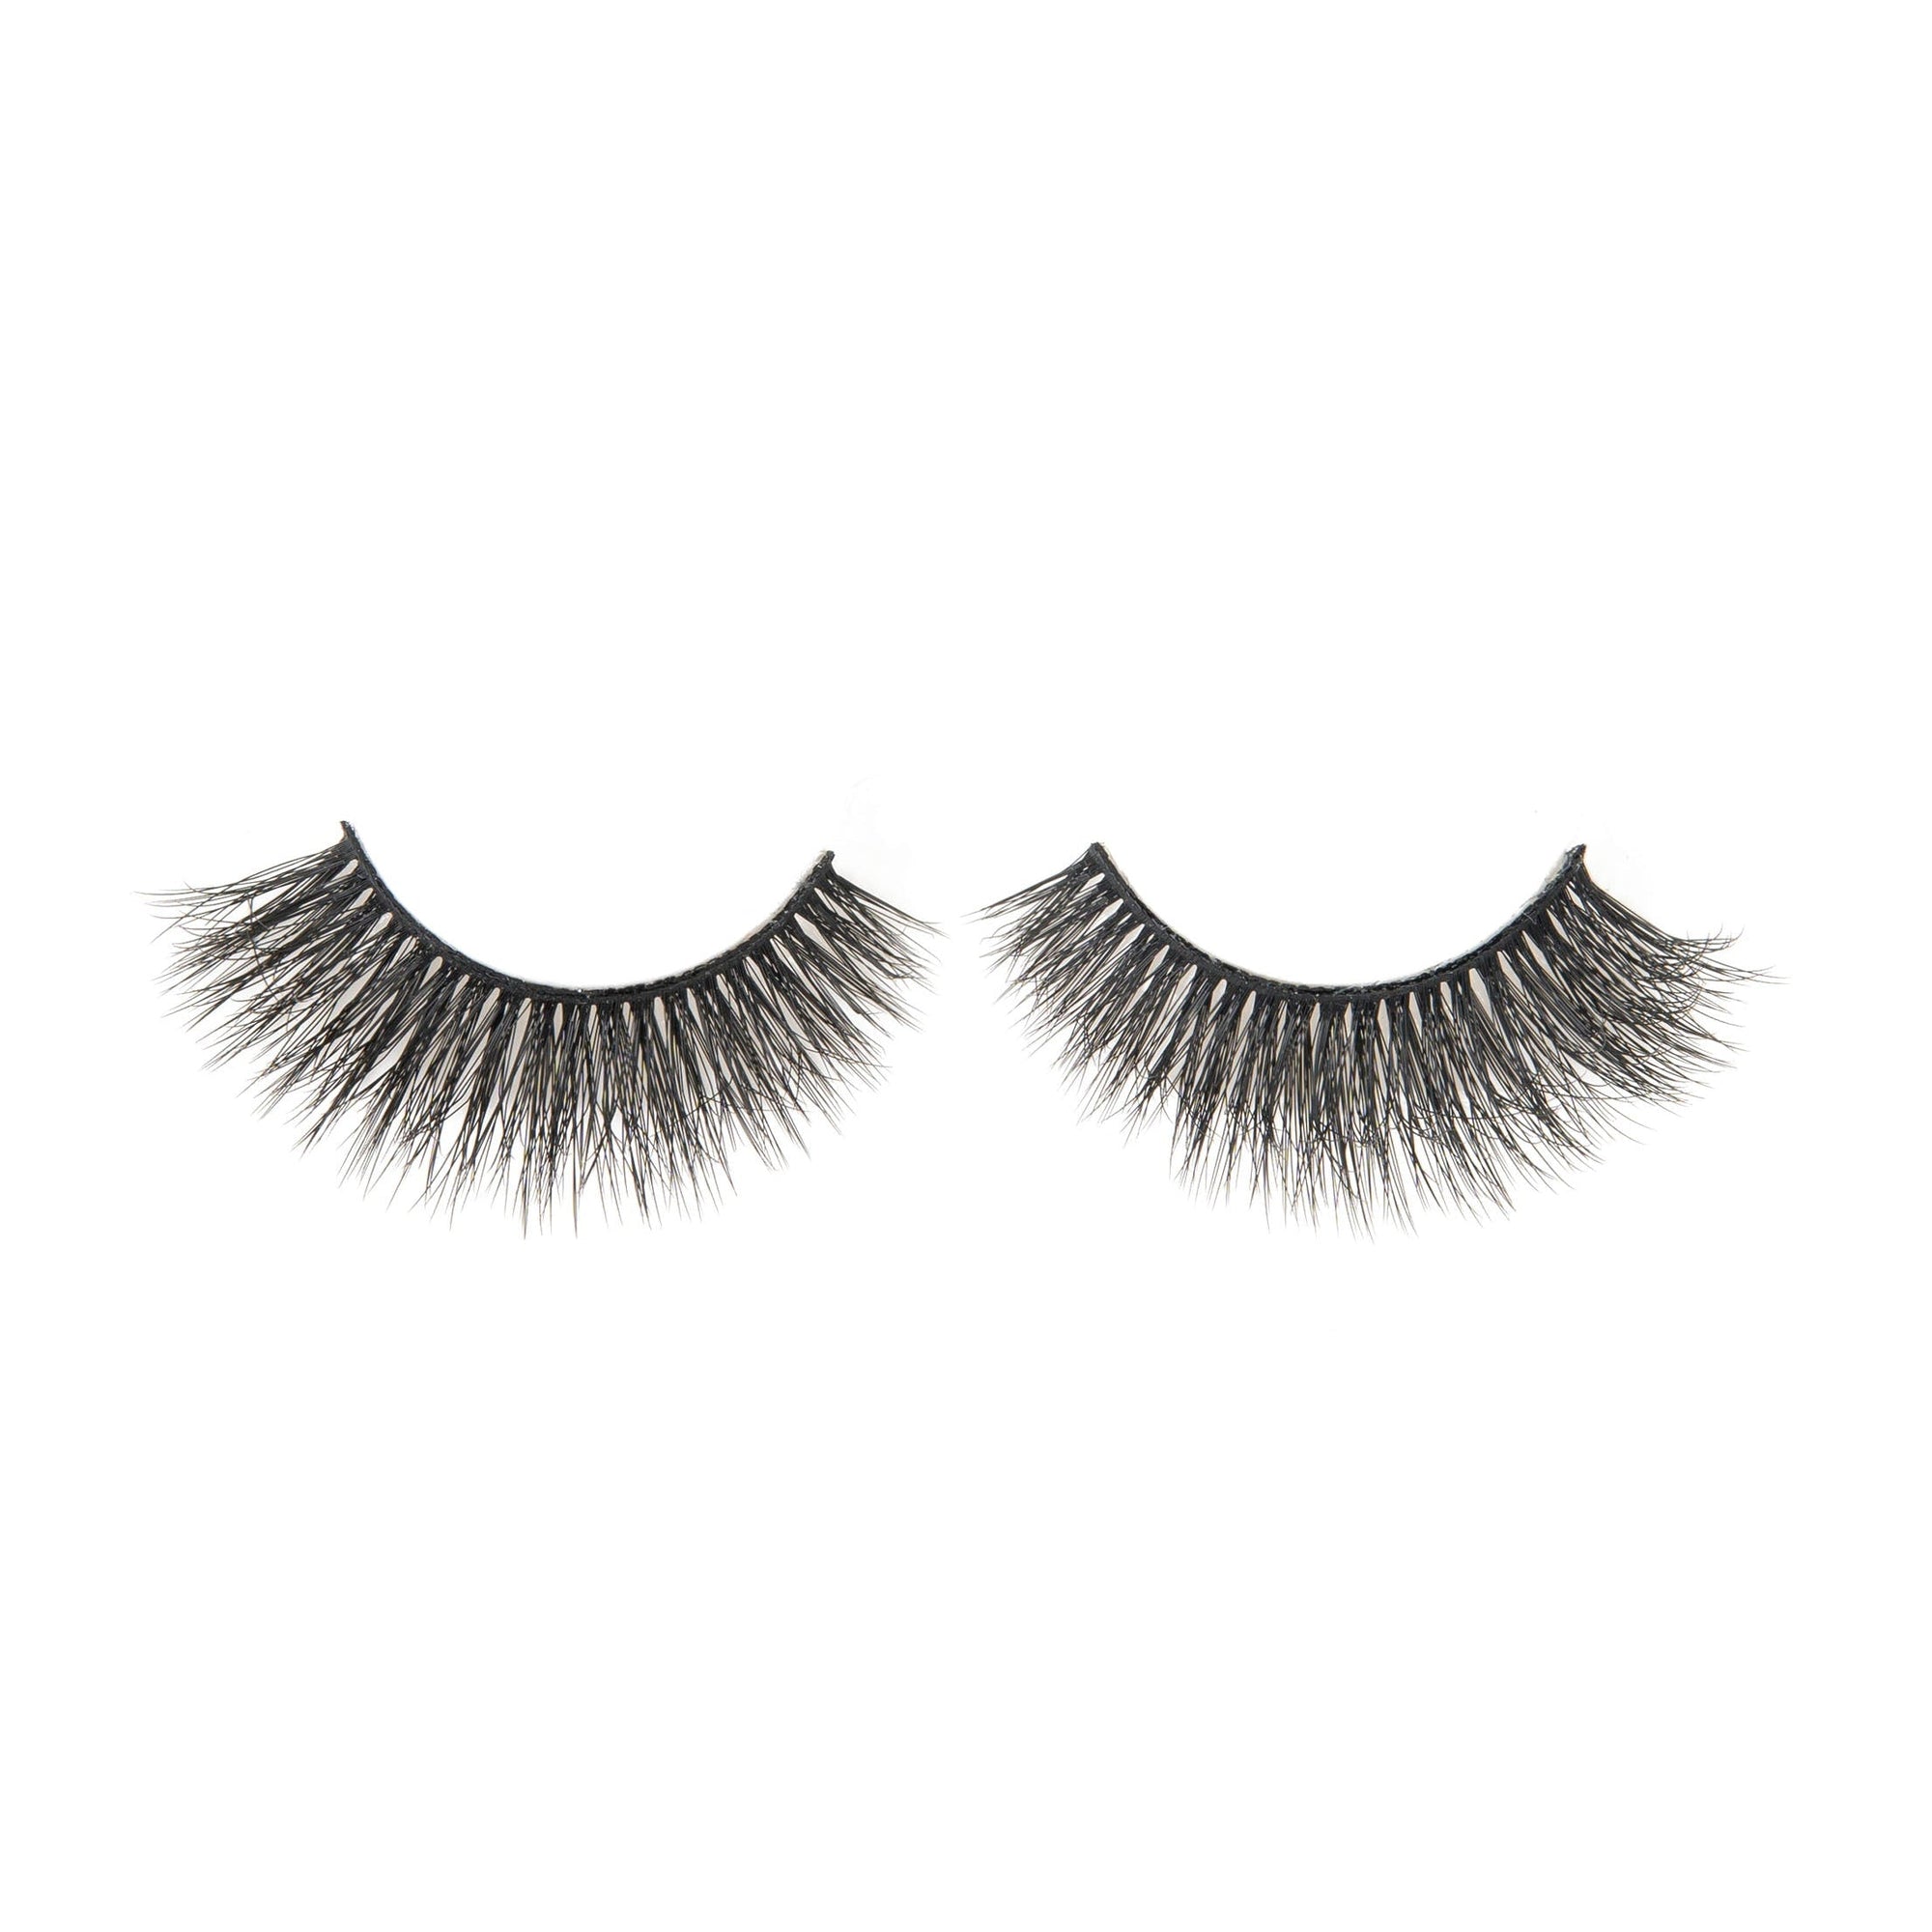 Eye Candy Signature Lash Collection Amor